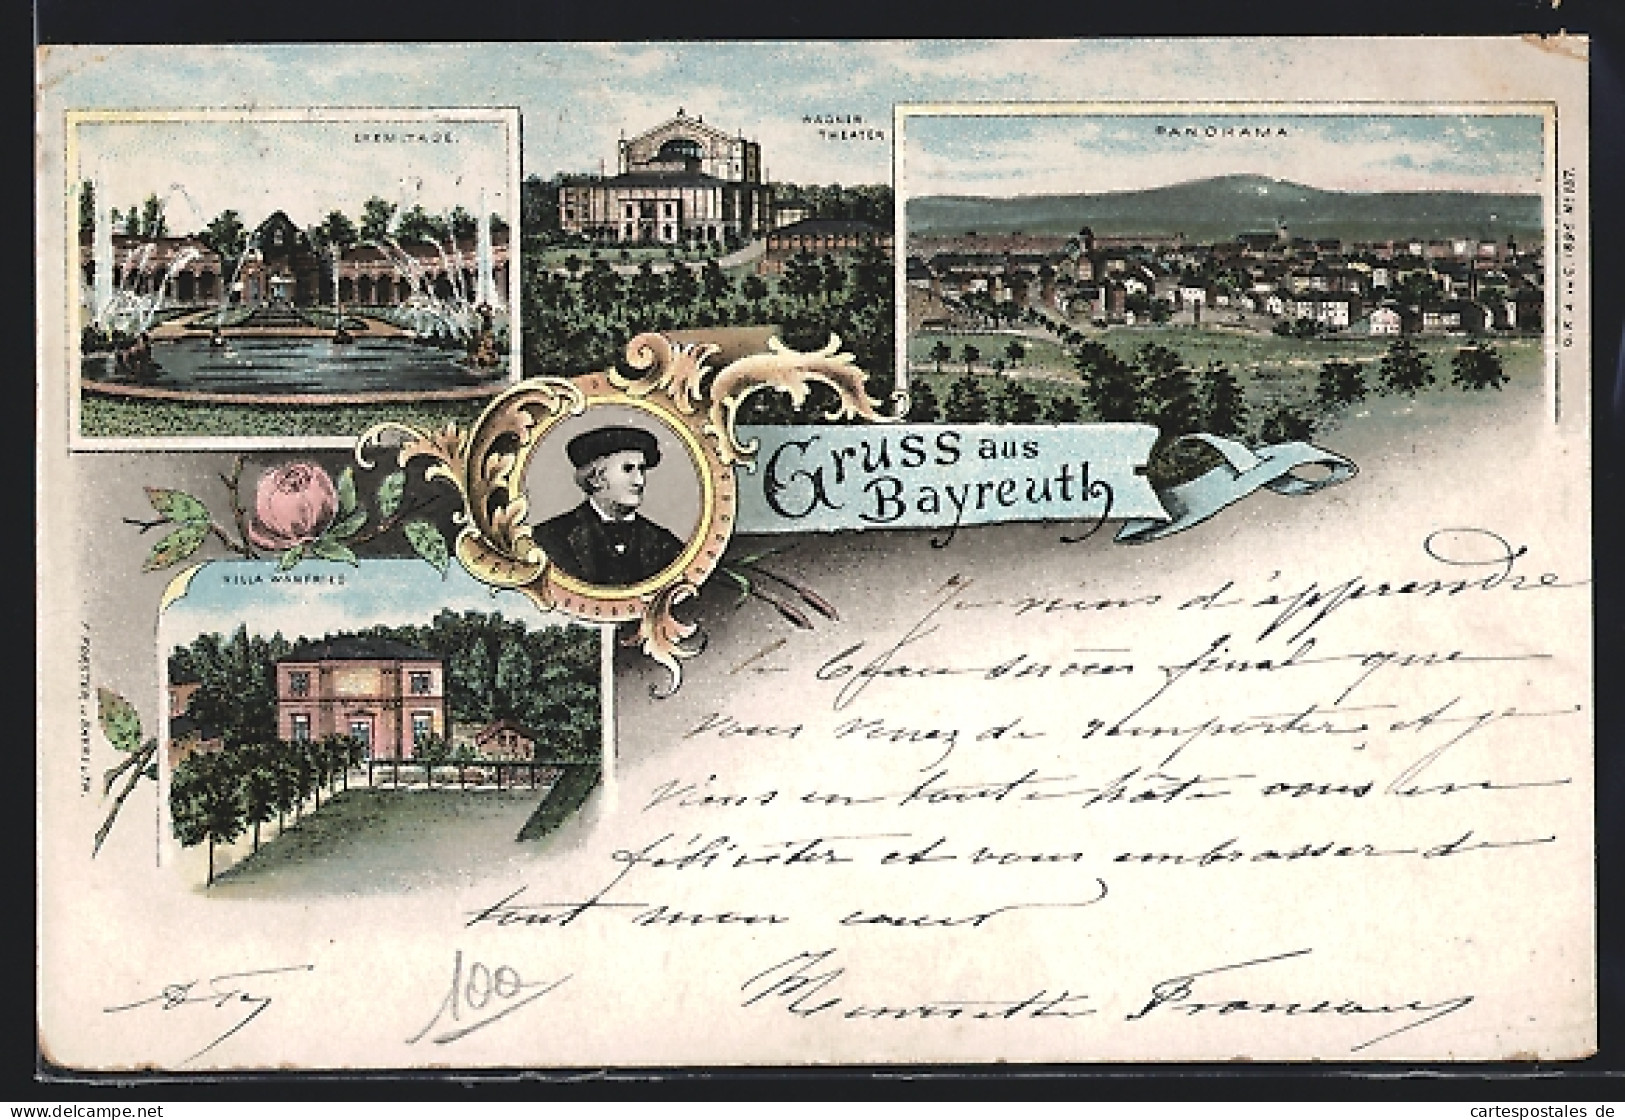 Lithographie Bayreuth, Wagner-Theater, Villa Wanfried, Eremitage, Panorama  - Teatro